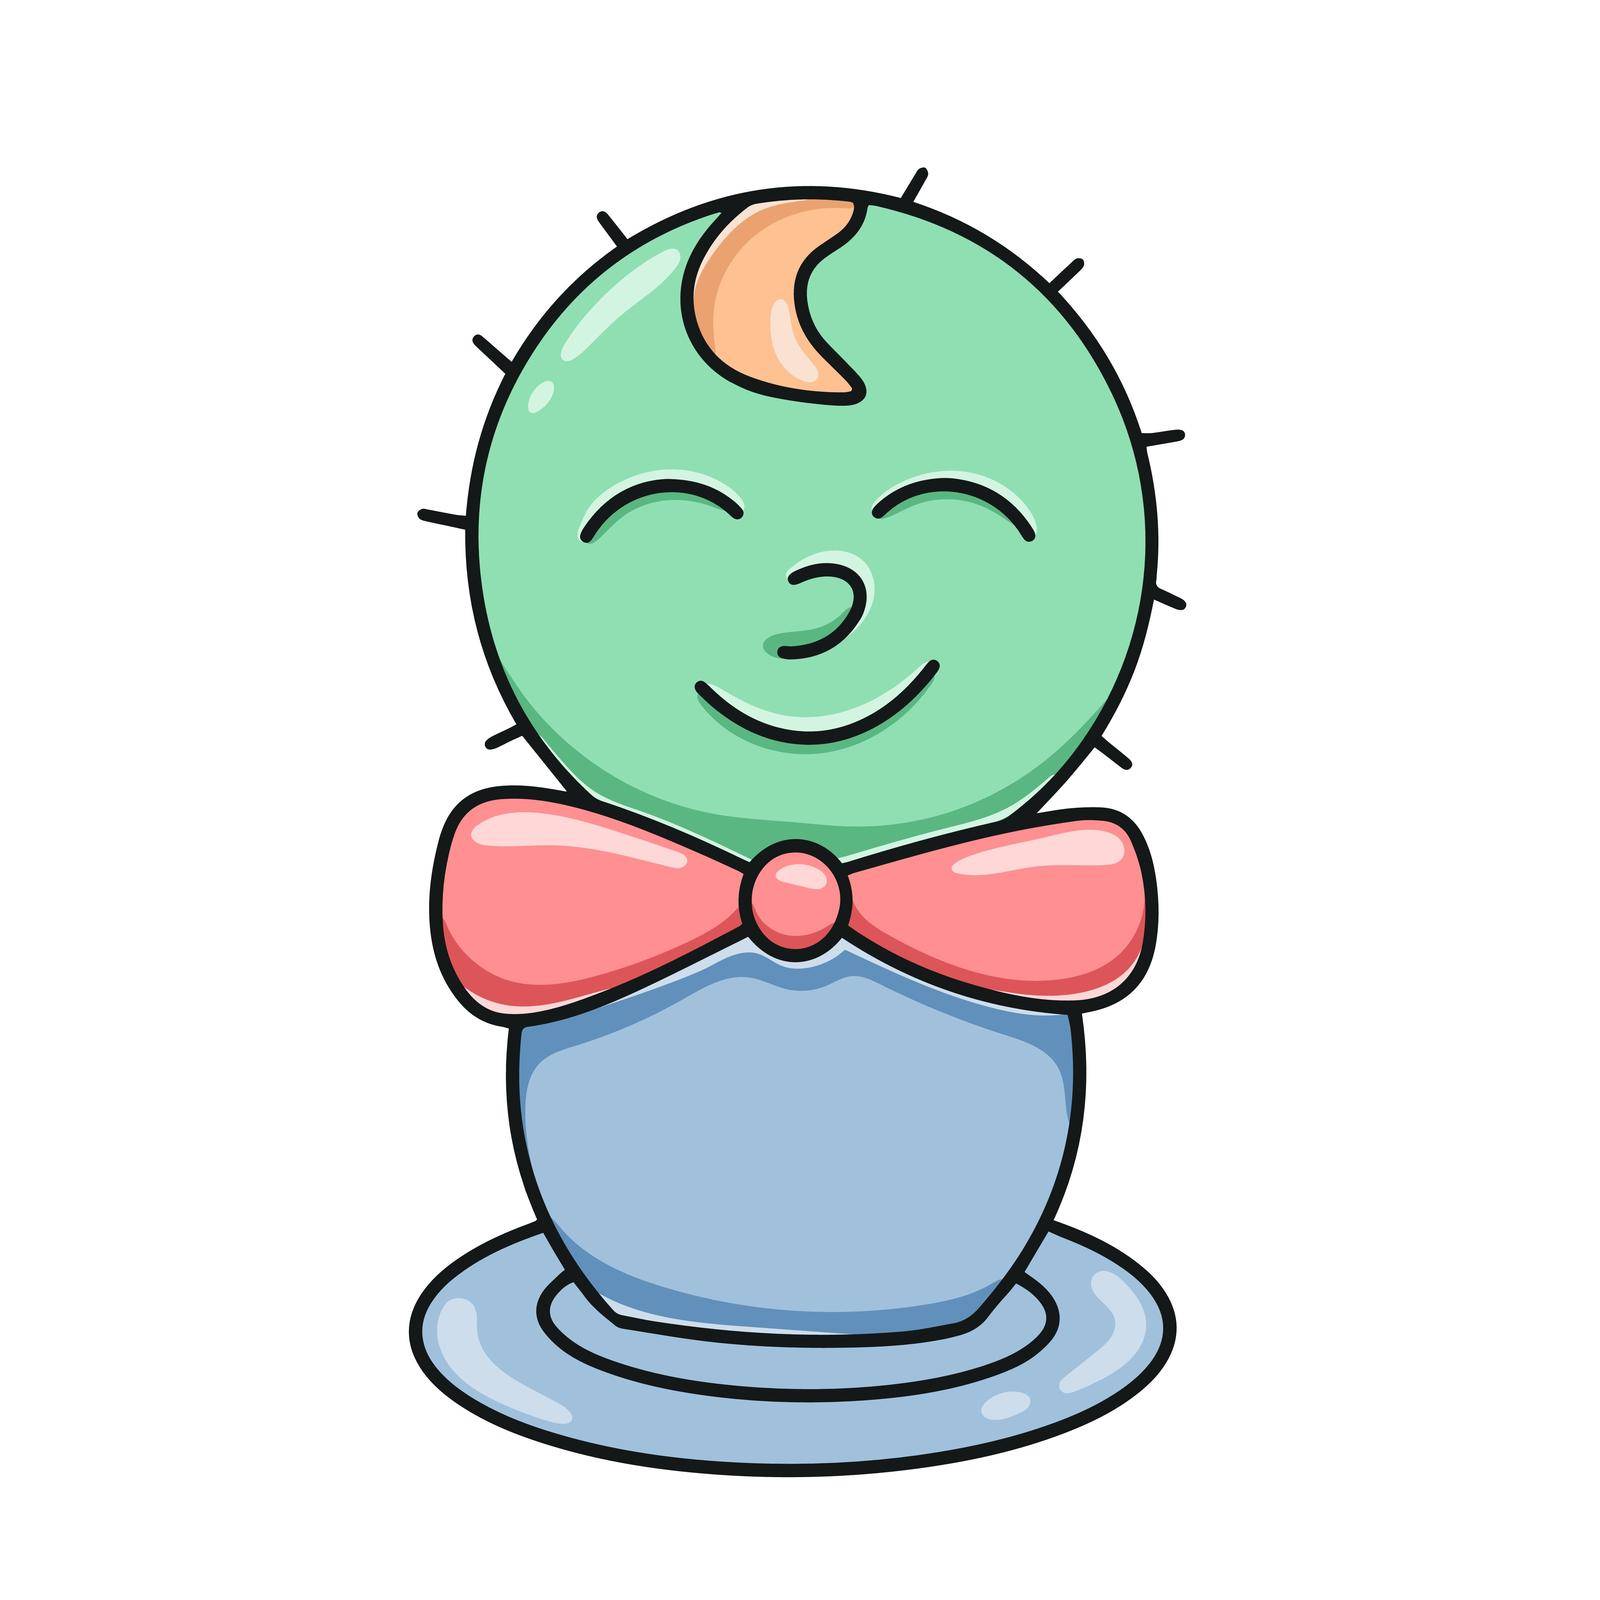 Cactus in pot baby character cartoon. Round prickly cactus kawaii isolated vector illustration